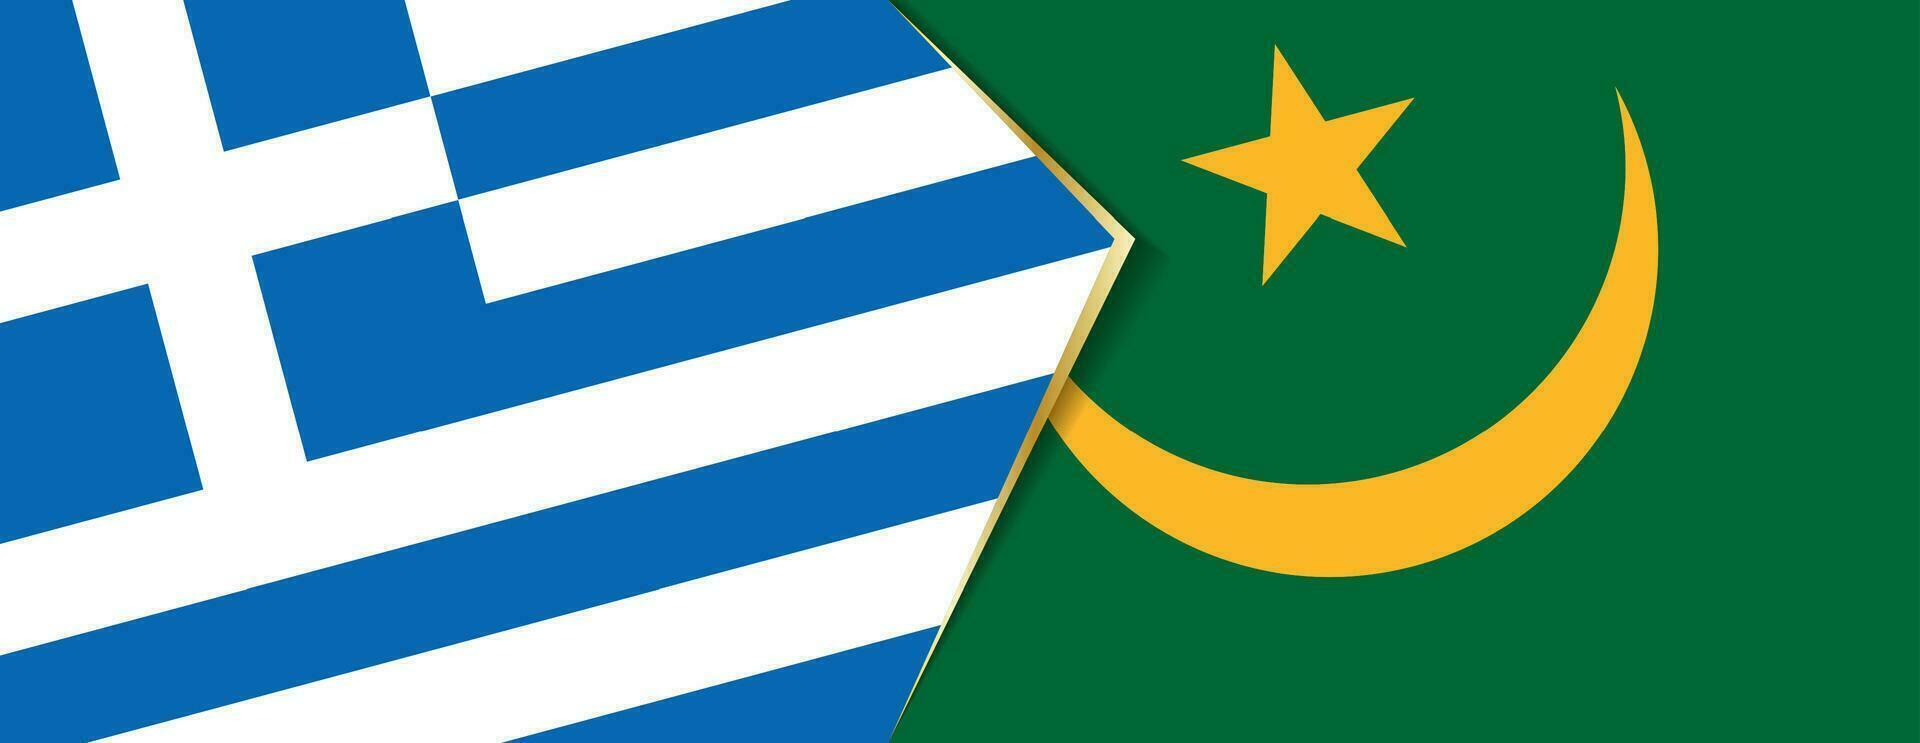 Greece and Mauritania flags, two vector flags.